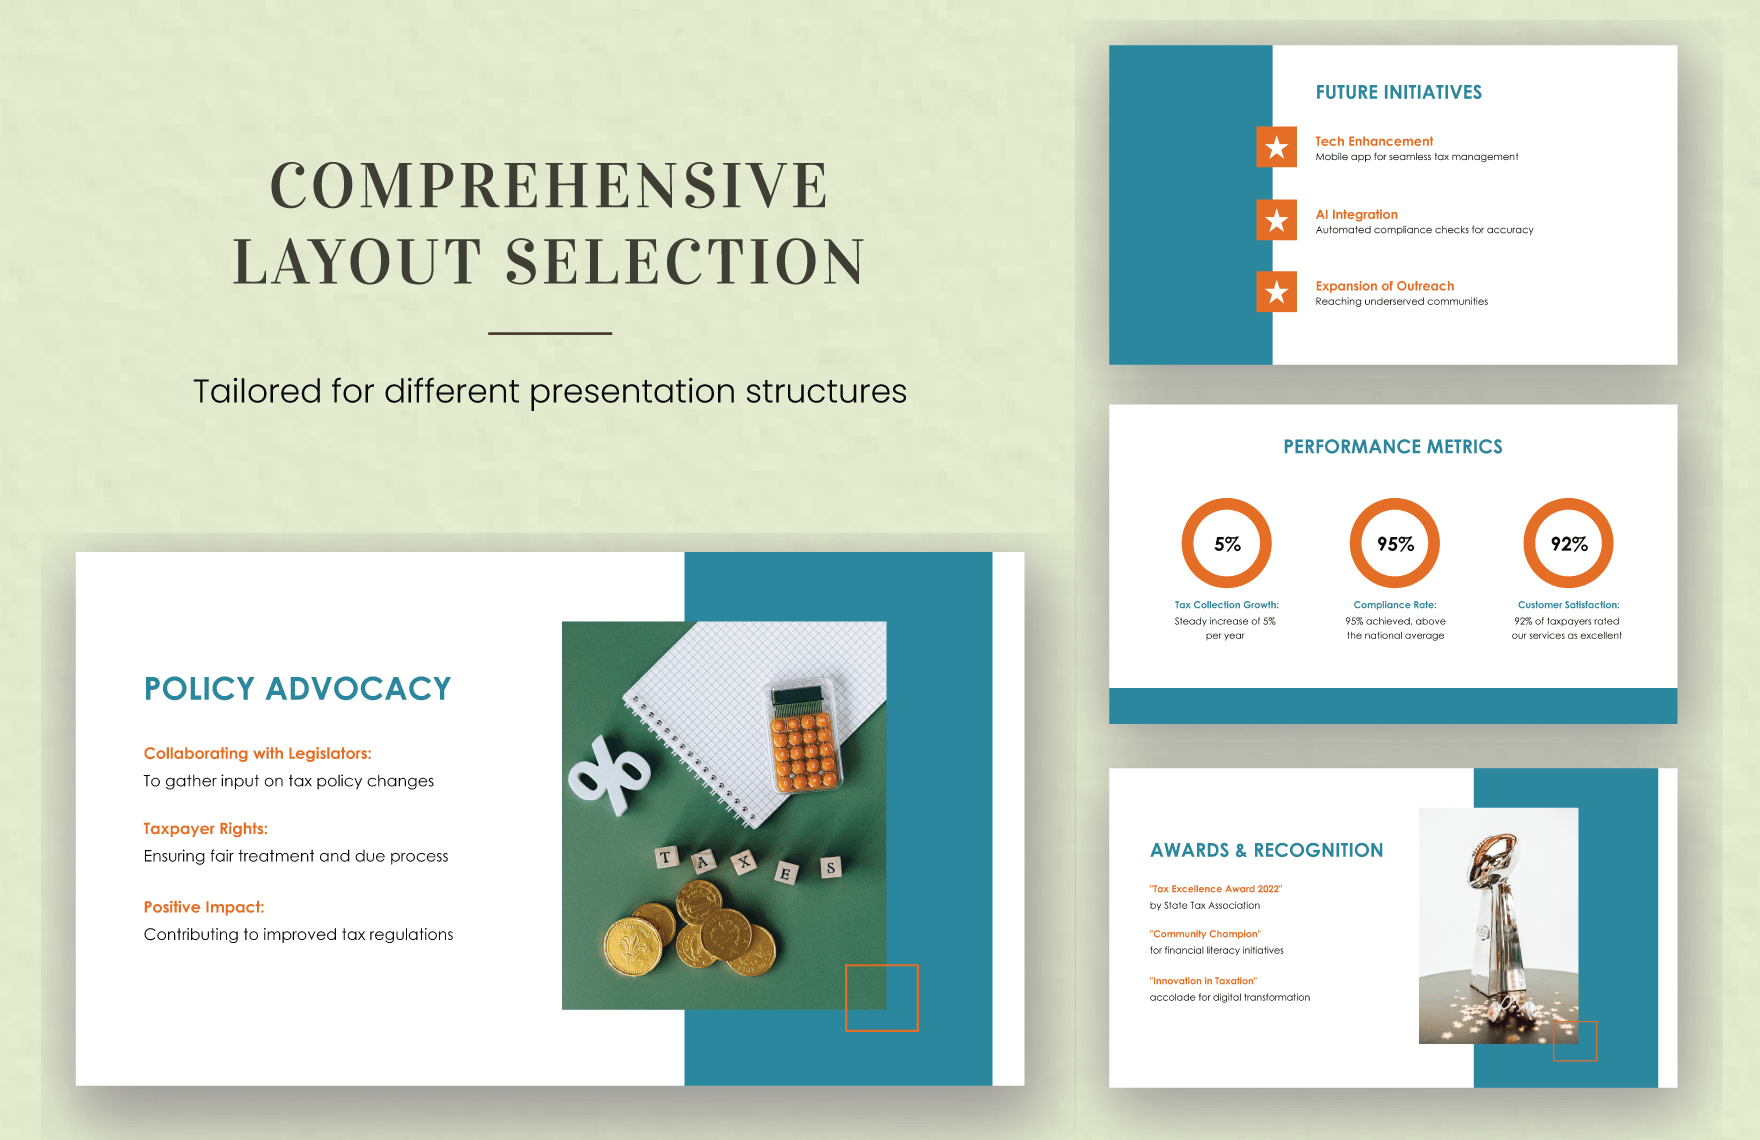 Income Tax Agency Presentation Template 